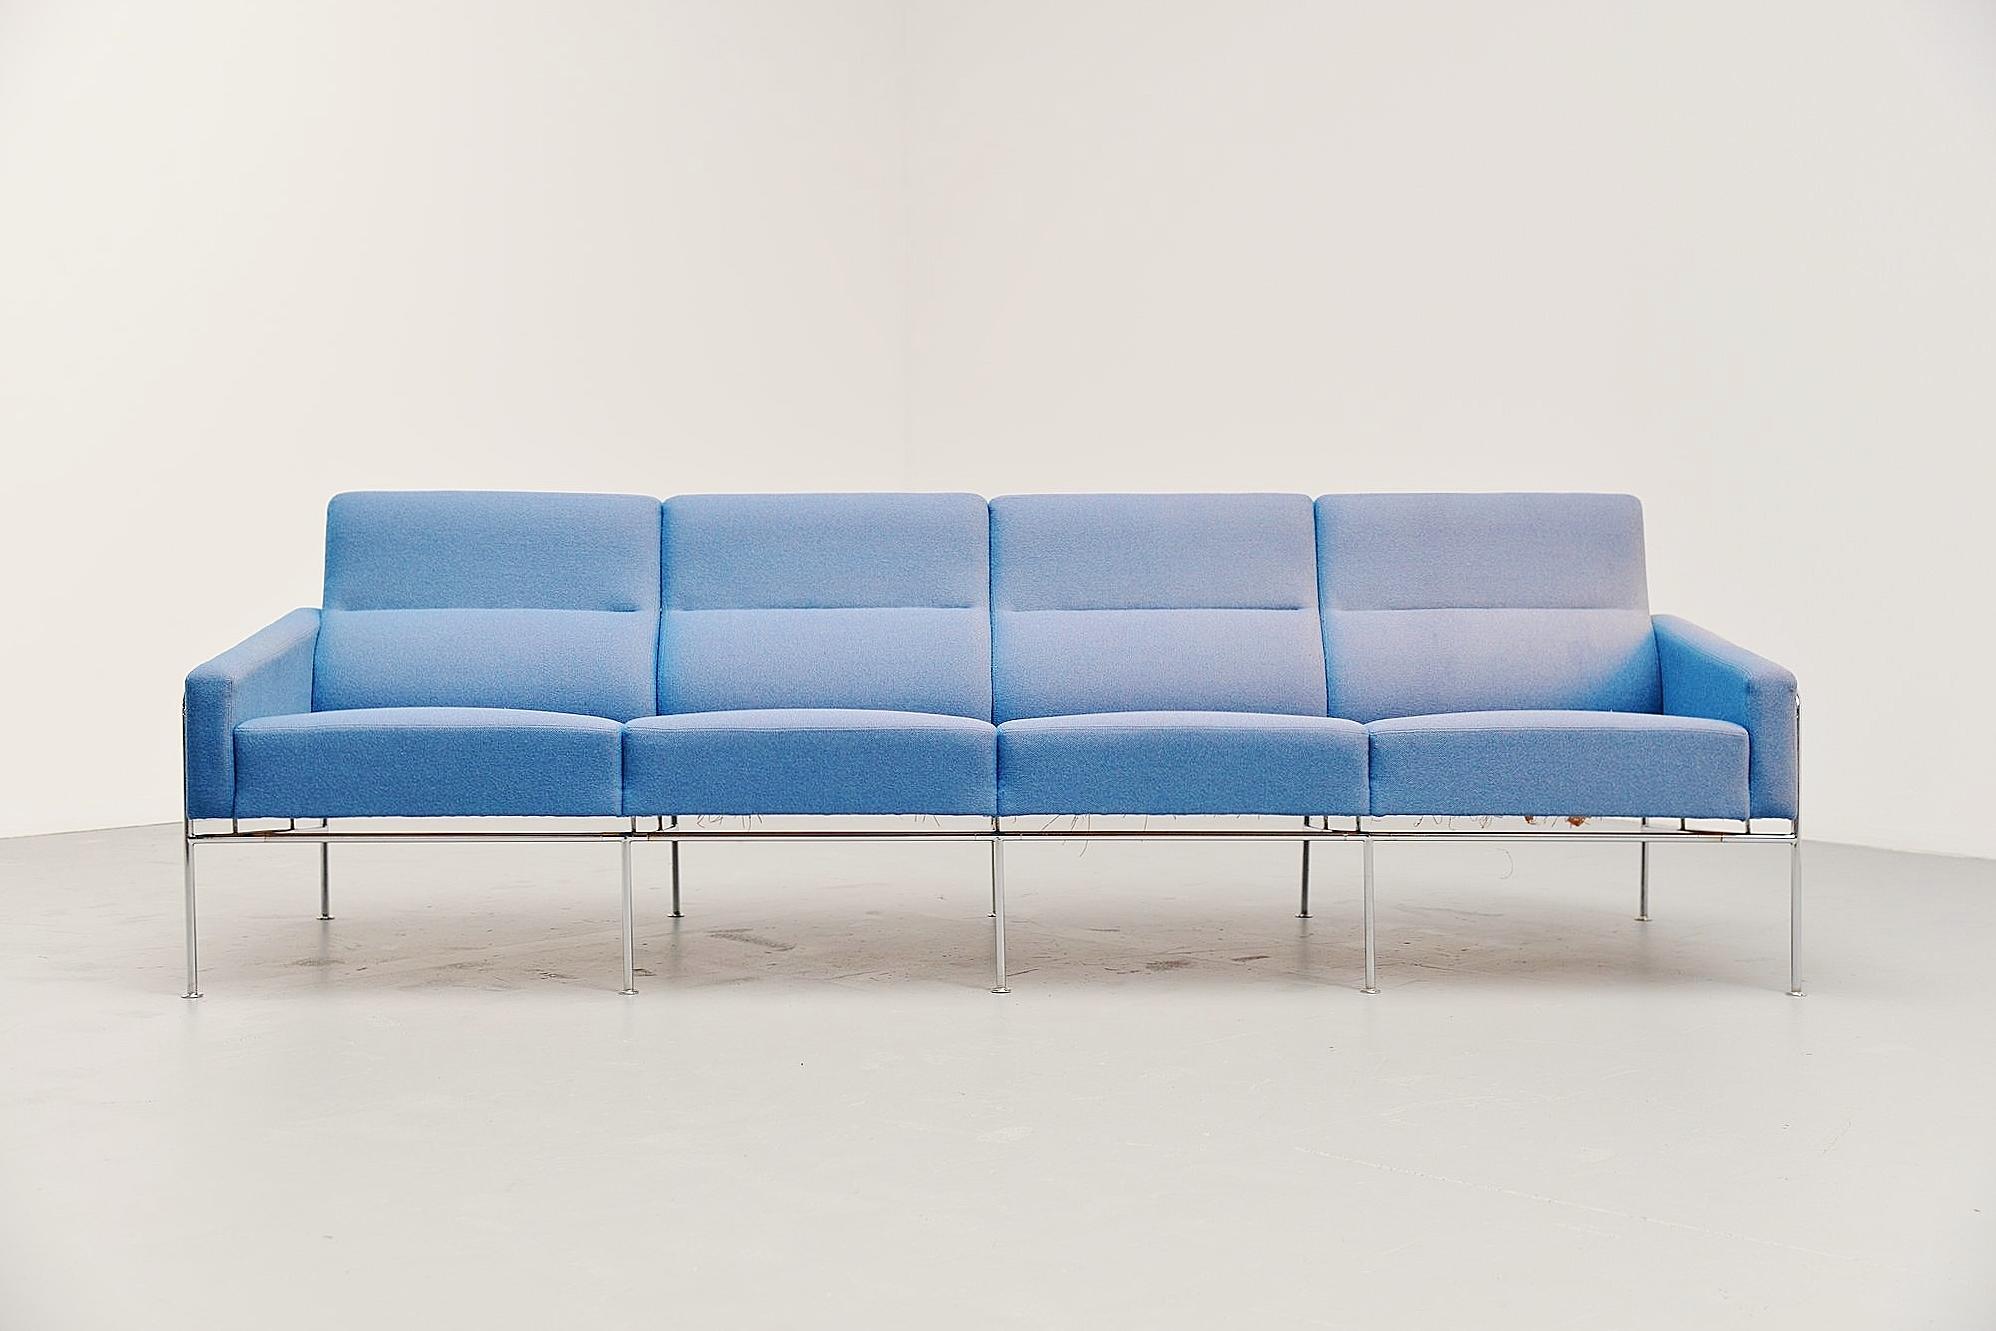 Nice and comfortable so called airport sofa model 3300/4 designed by Arne Jacobsen for the SAS Royal Terminal in 1957. Produced by Fritz Hansen, this sofa is from 1986. The sofa is a modular design and this is one of the largest versions I saw, a 1